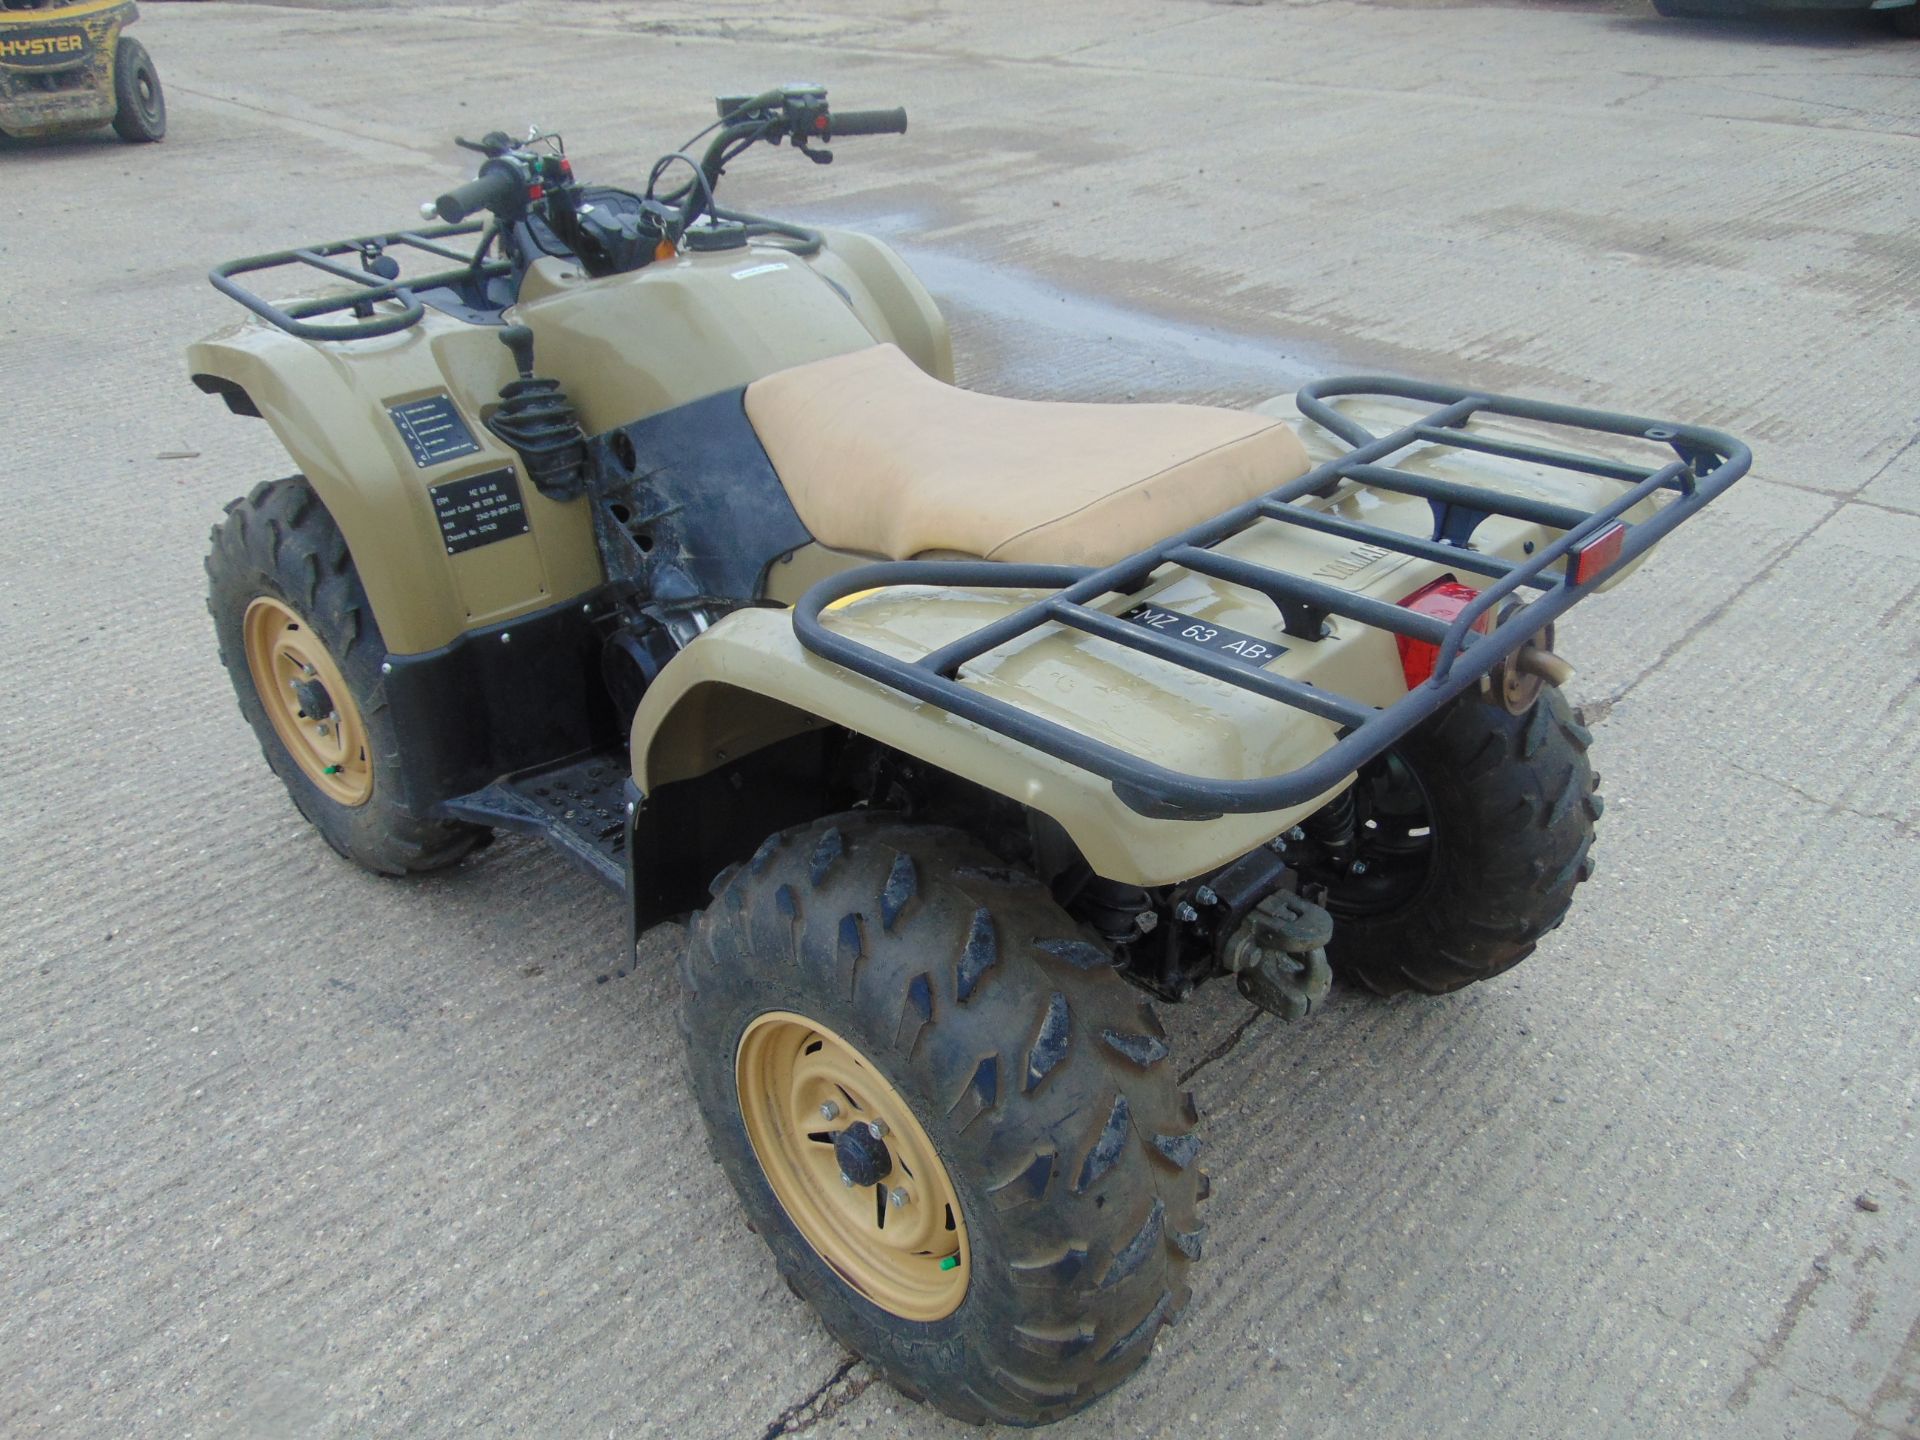 Military Specification Yamaha Grizzly 450 4 x 4 ATV Quad Bike - Image 5 of 19